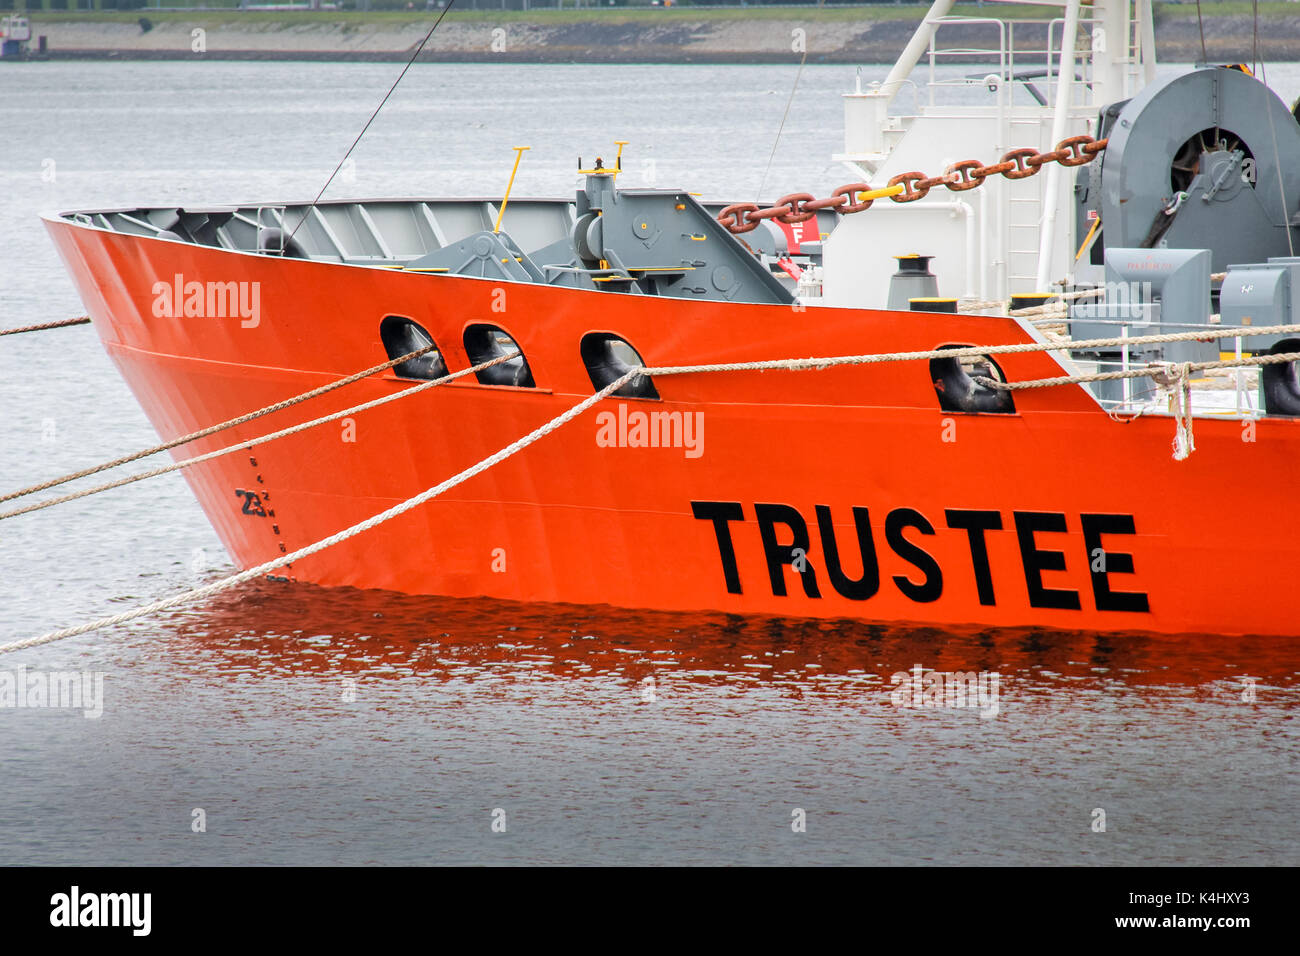 Caland canal, Rotterdam, the Netherlands, May 29, 2014: The bow of the Dockwise semi-submersible vessel Trustee in submerged condition Stock Photo